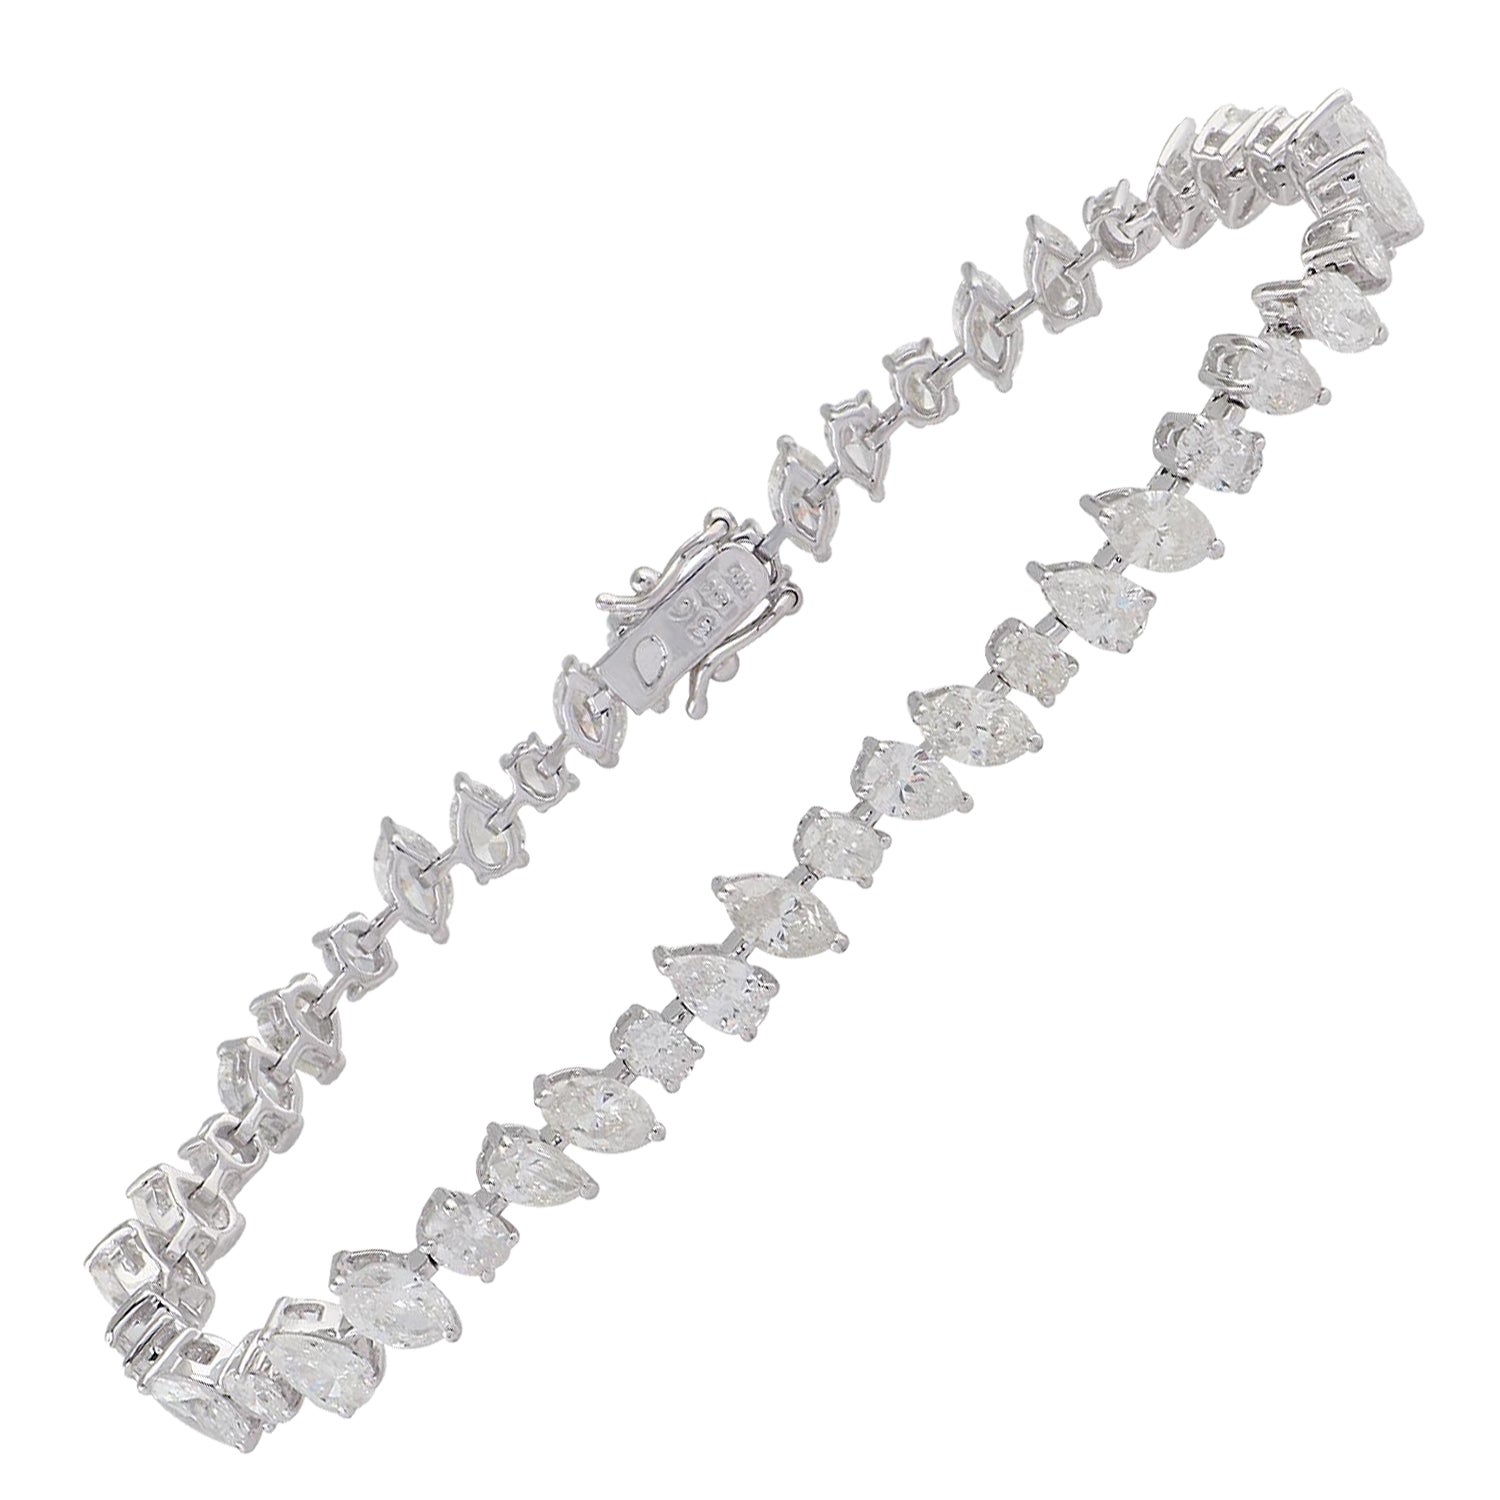 9.65 Carat Pear Marquise Oval Diamond Bracelet 18 Kt White Gold Handmade Jewelry For Sale